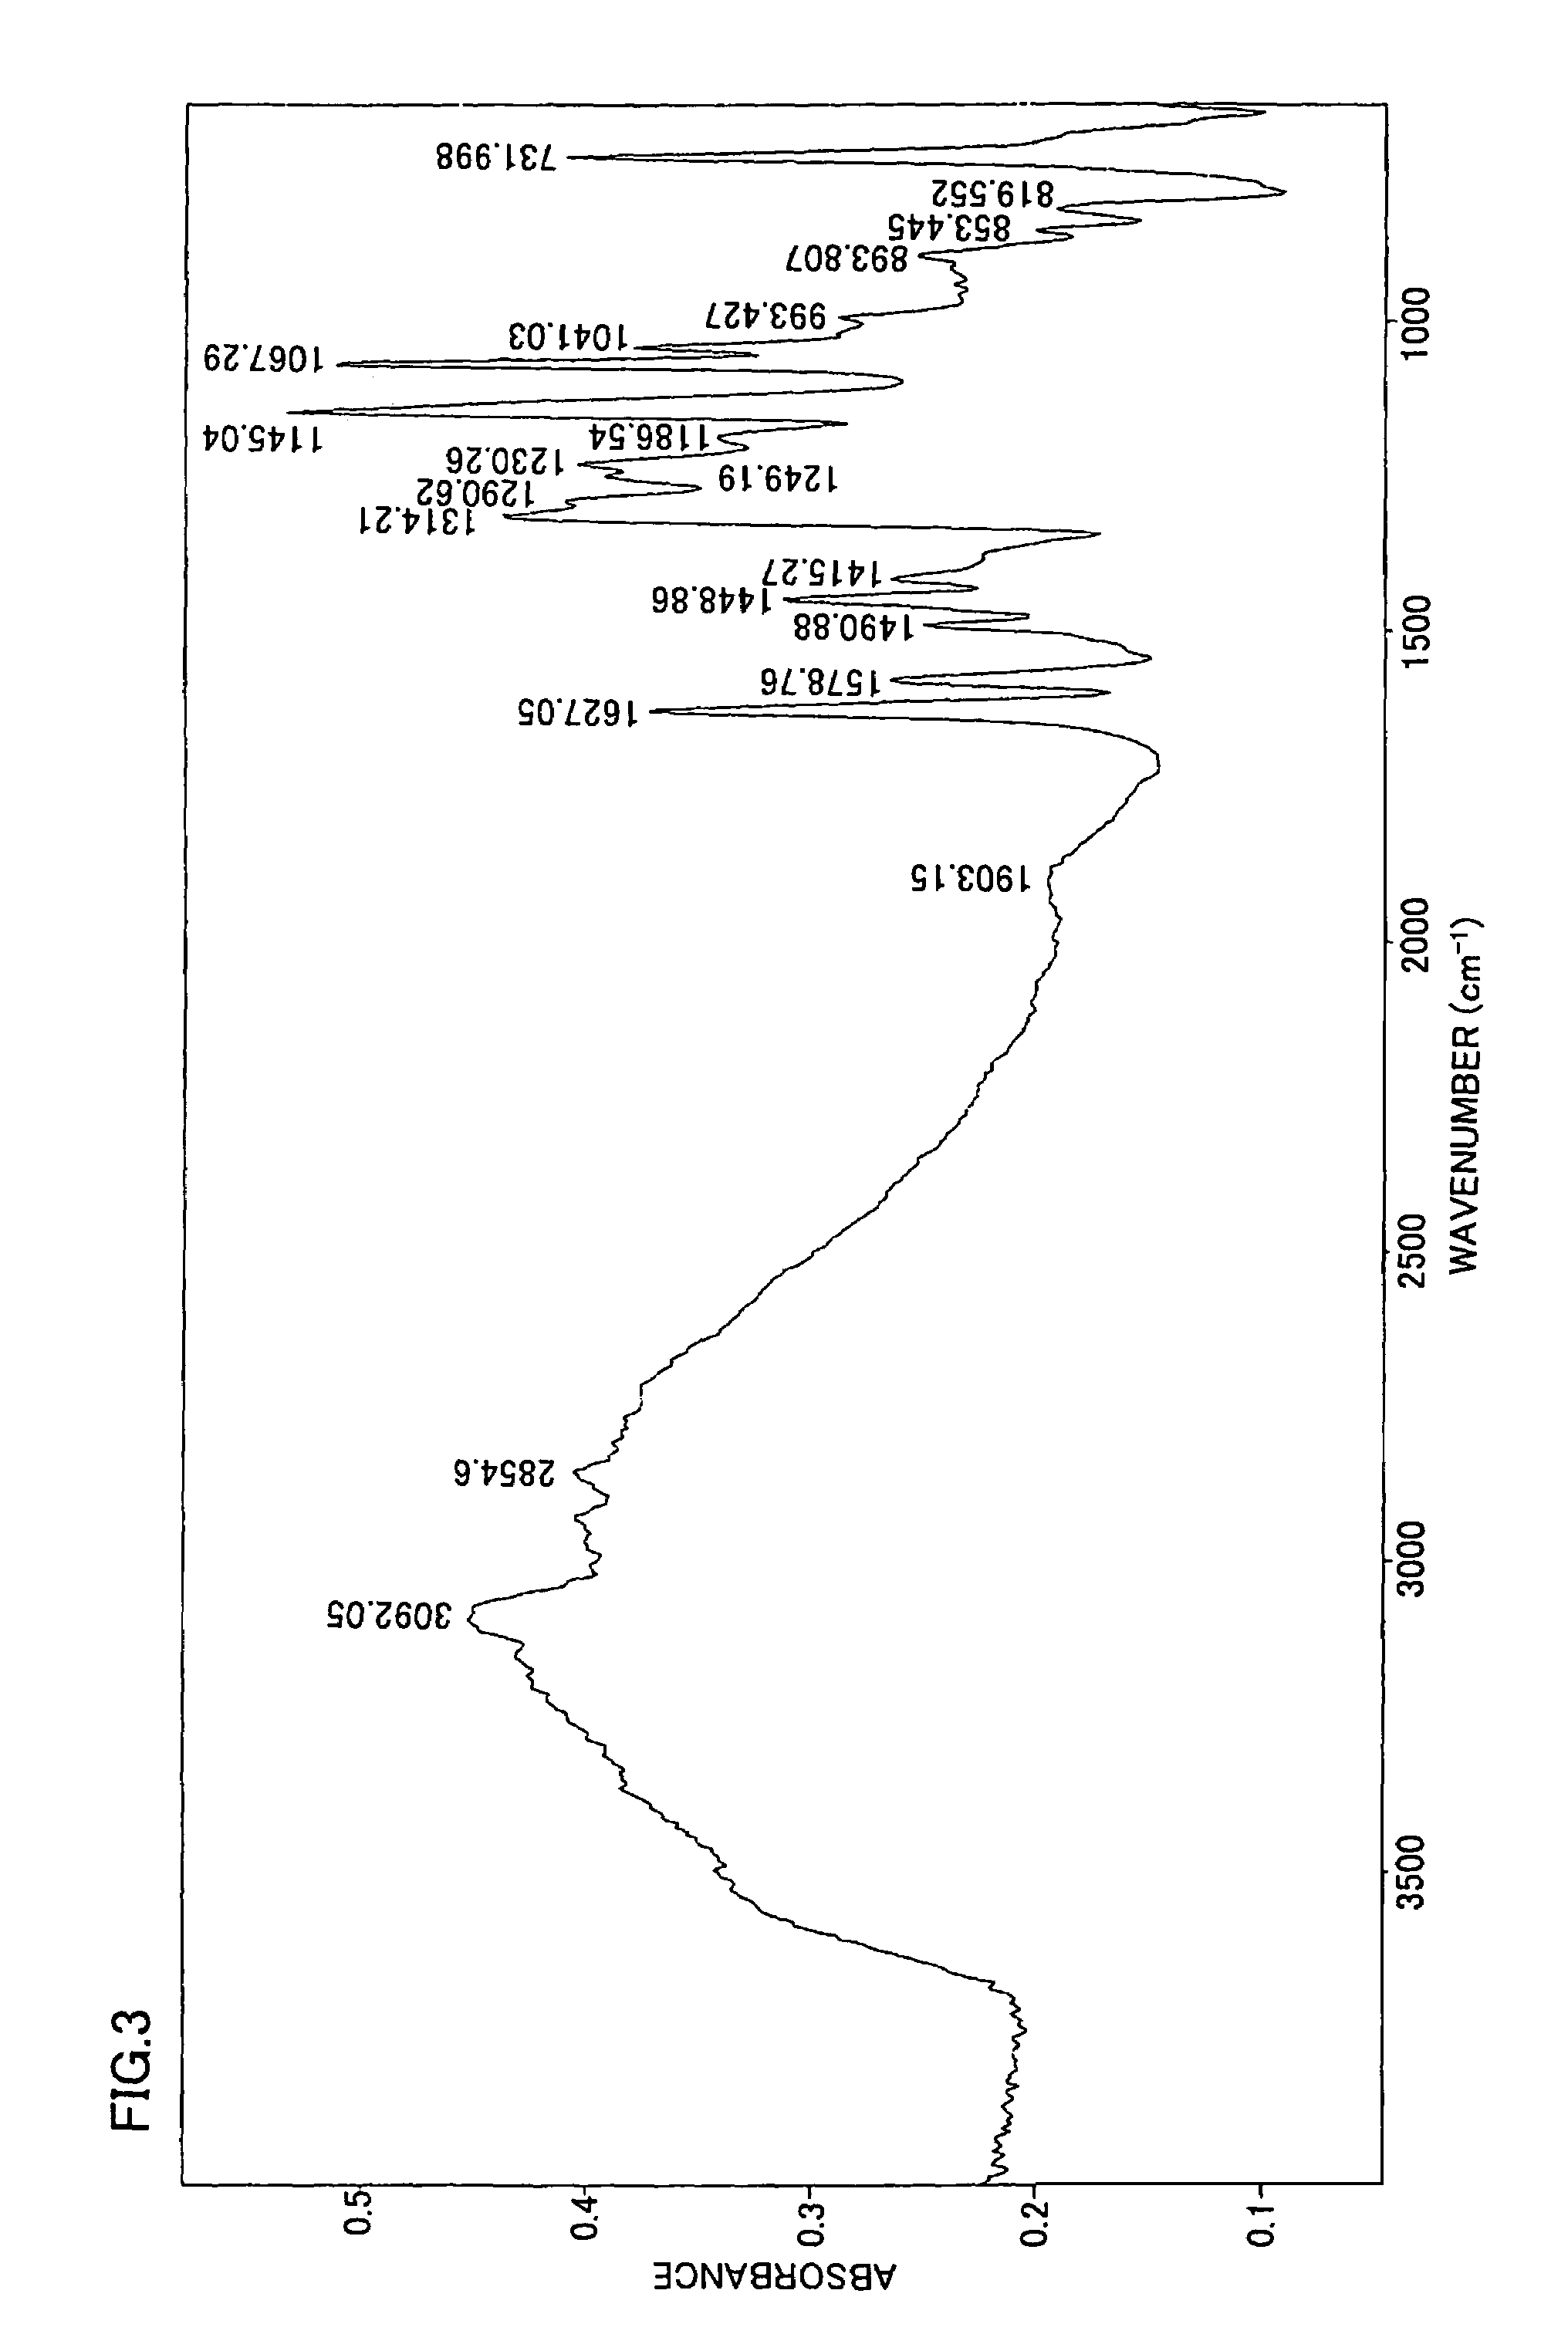 Polybenzazole compound having sulfonic acid group and/or phosphonic acid group, resin composition containing the same, resin molding, solid polymer electrolyte membrane, solid polymer electrolyte membrane/electrode assembly and method of preparing assembly